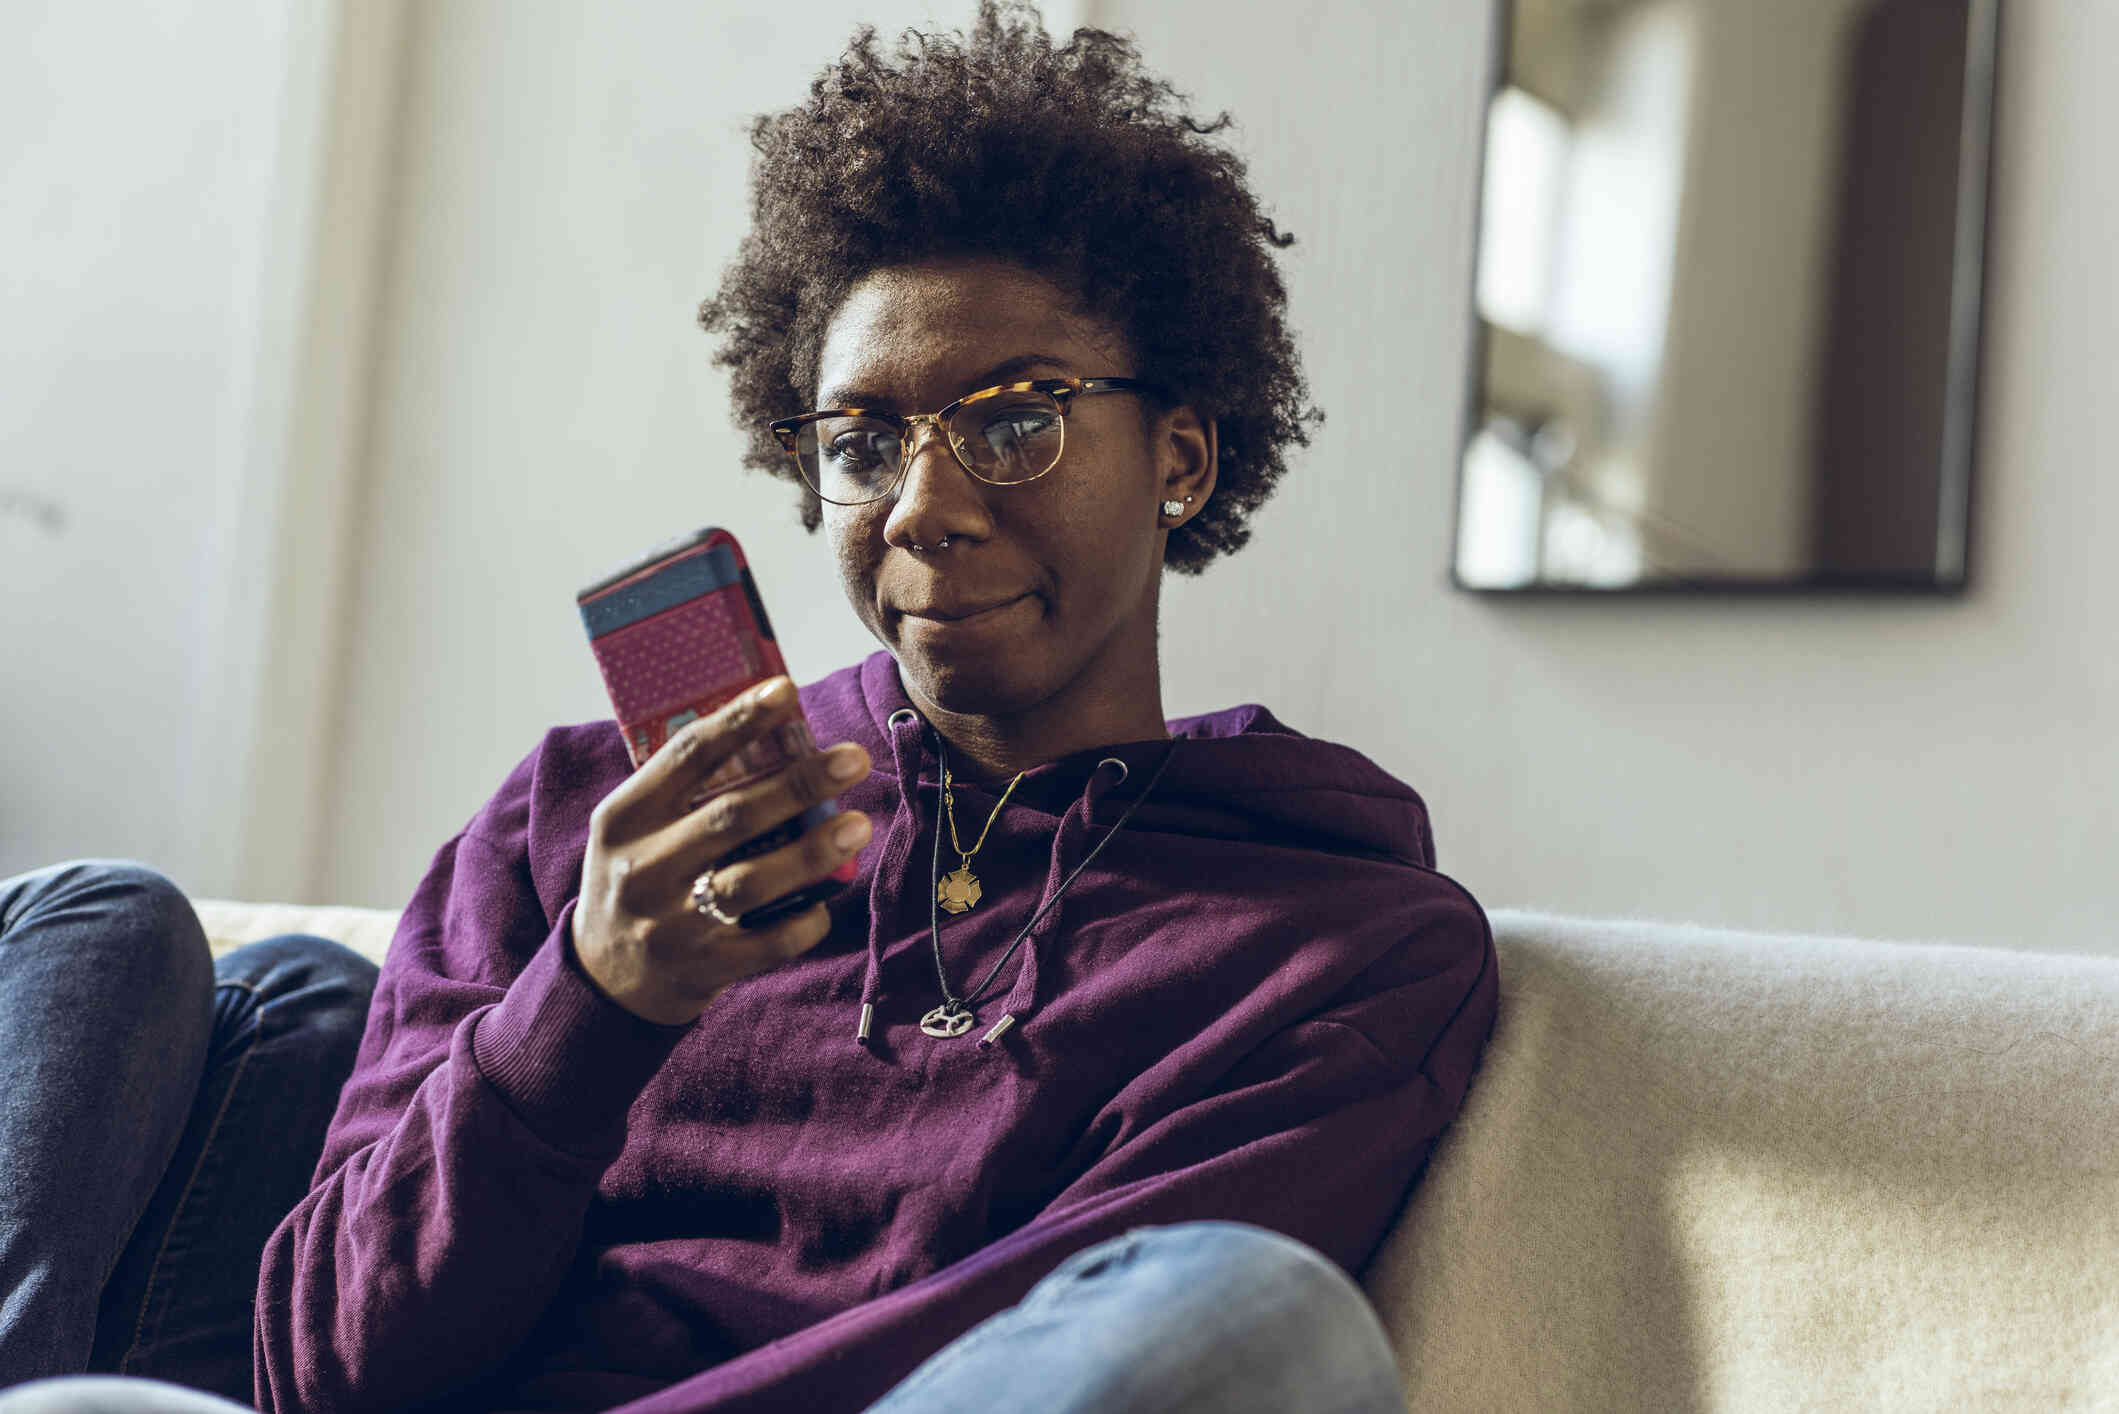 A woman in a purple sweater sits on her couch and looks at the cellphone in her hand with a thoughtful expression.